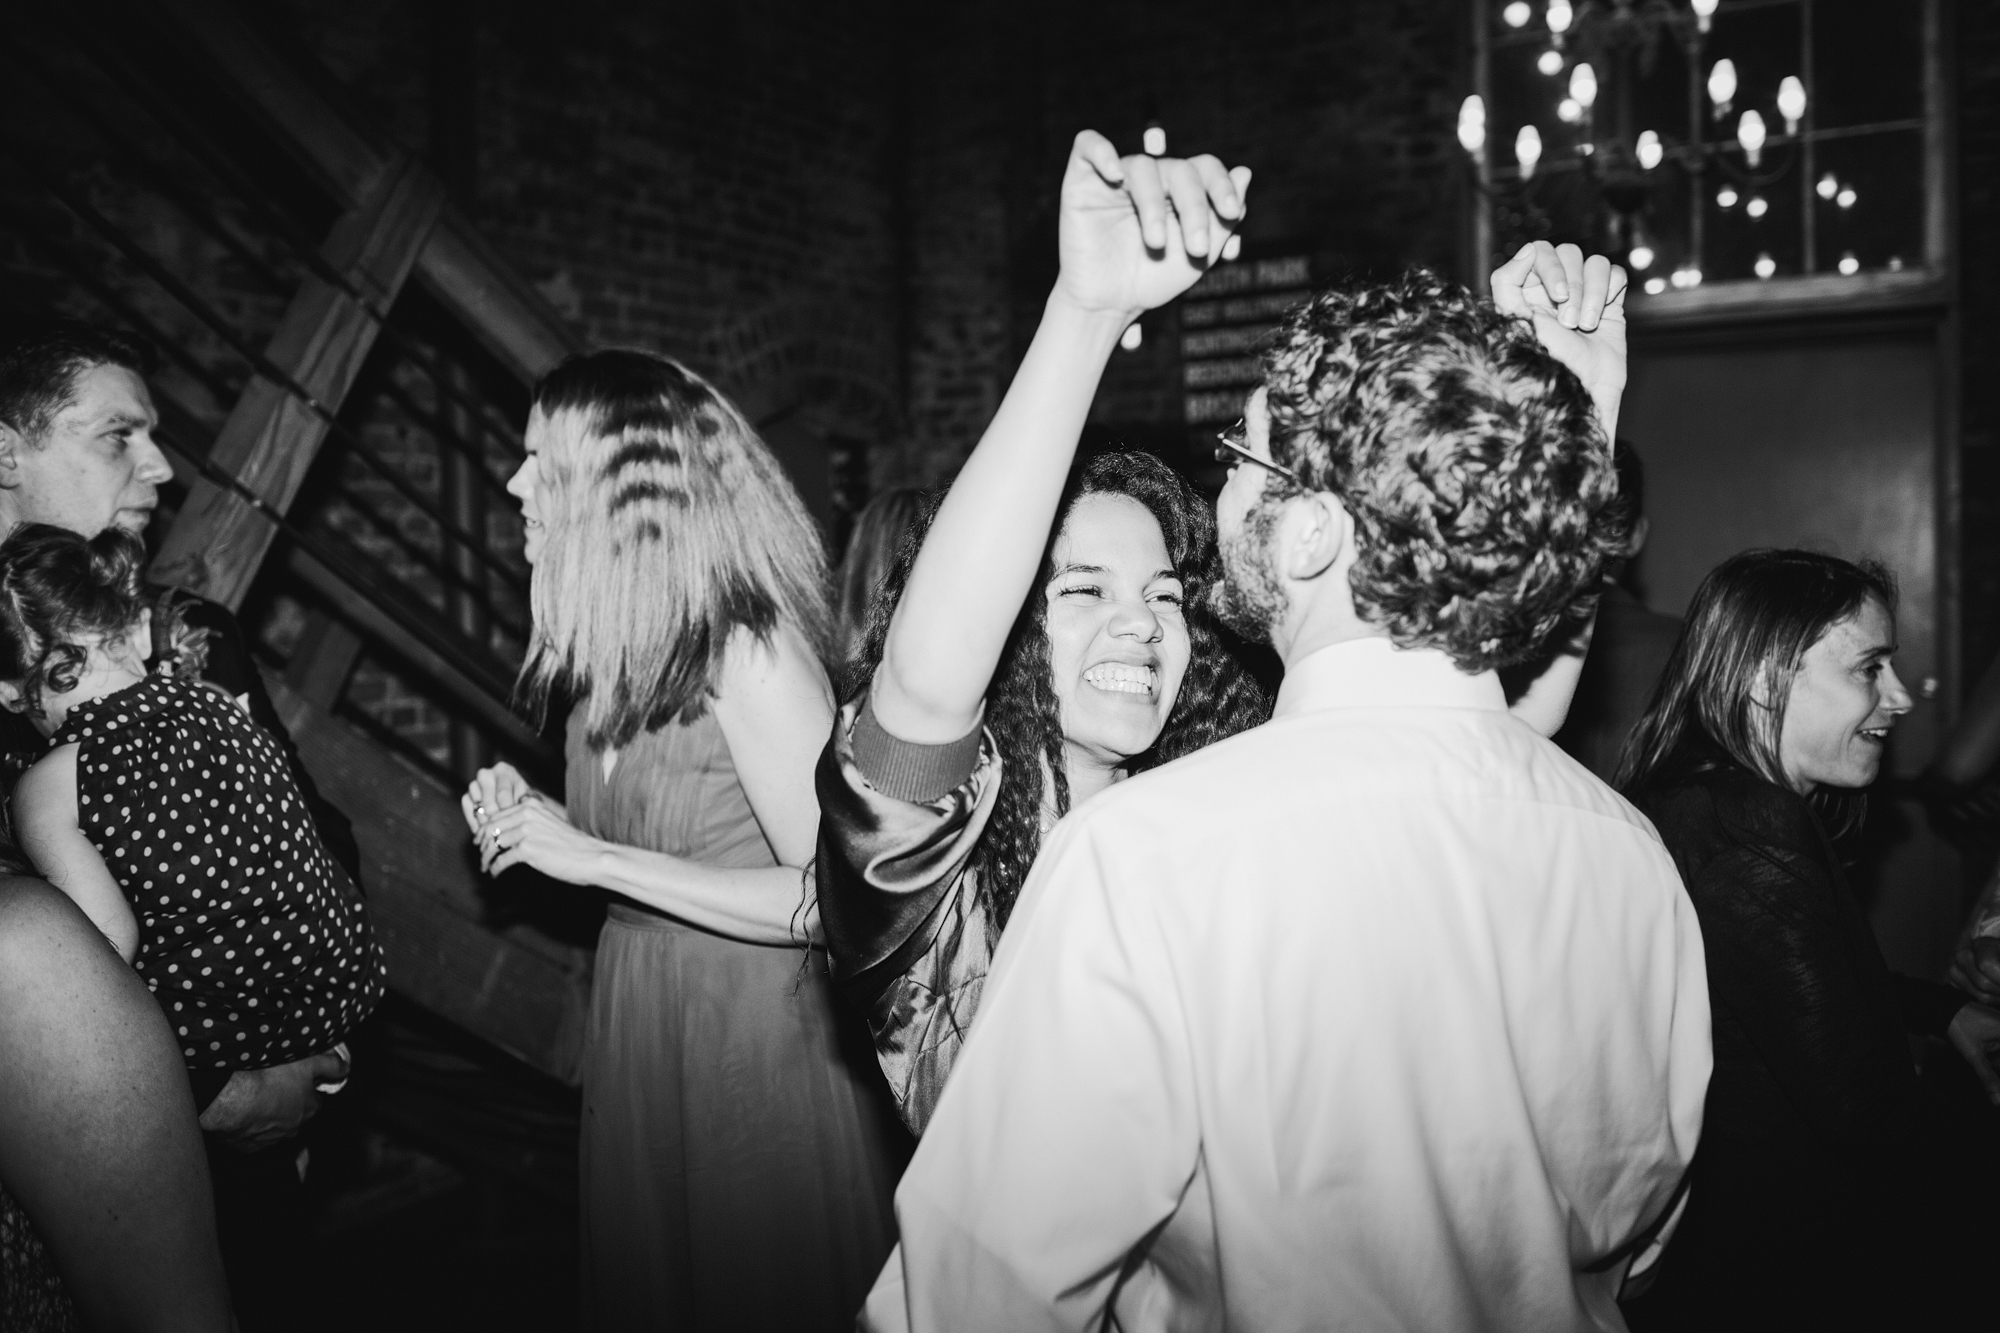 This is a photo of guests dancing at the wedding.